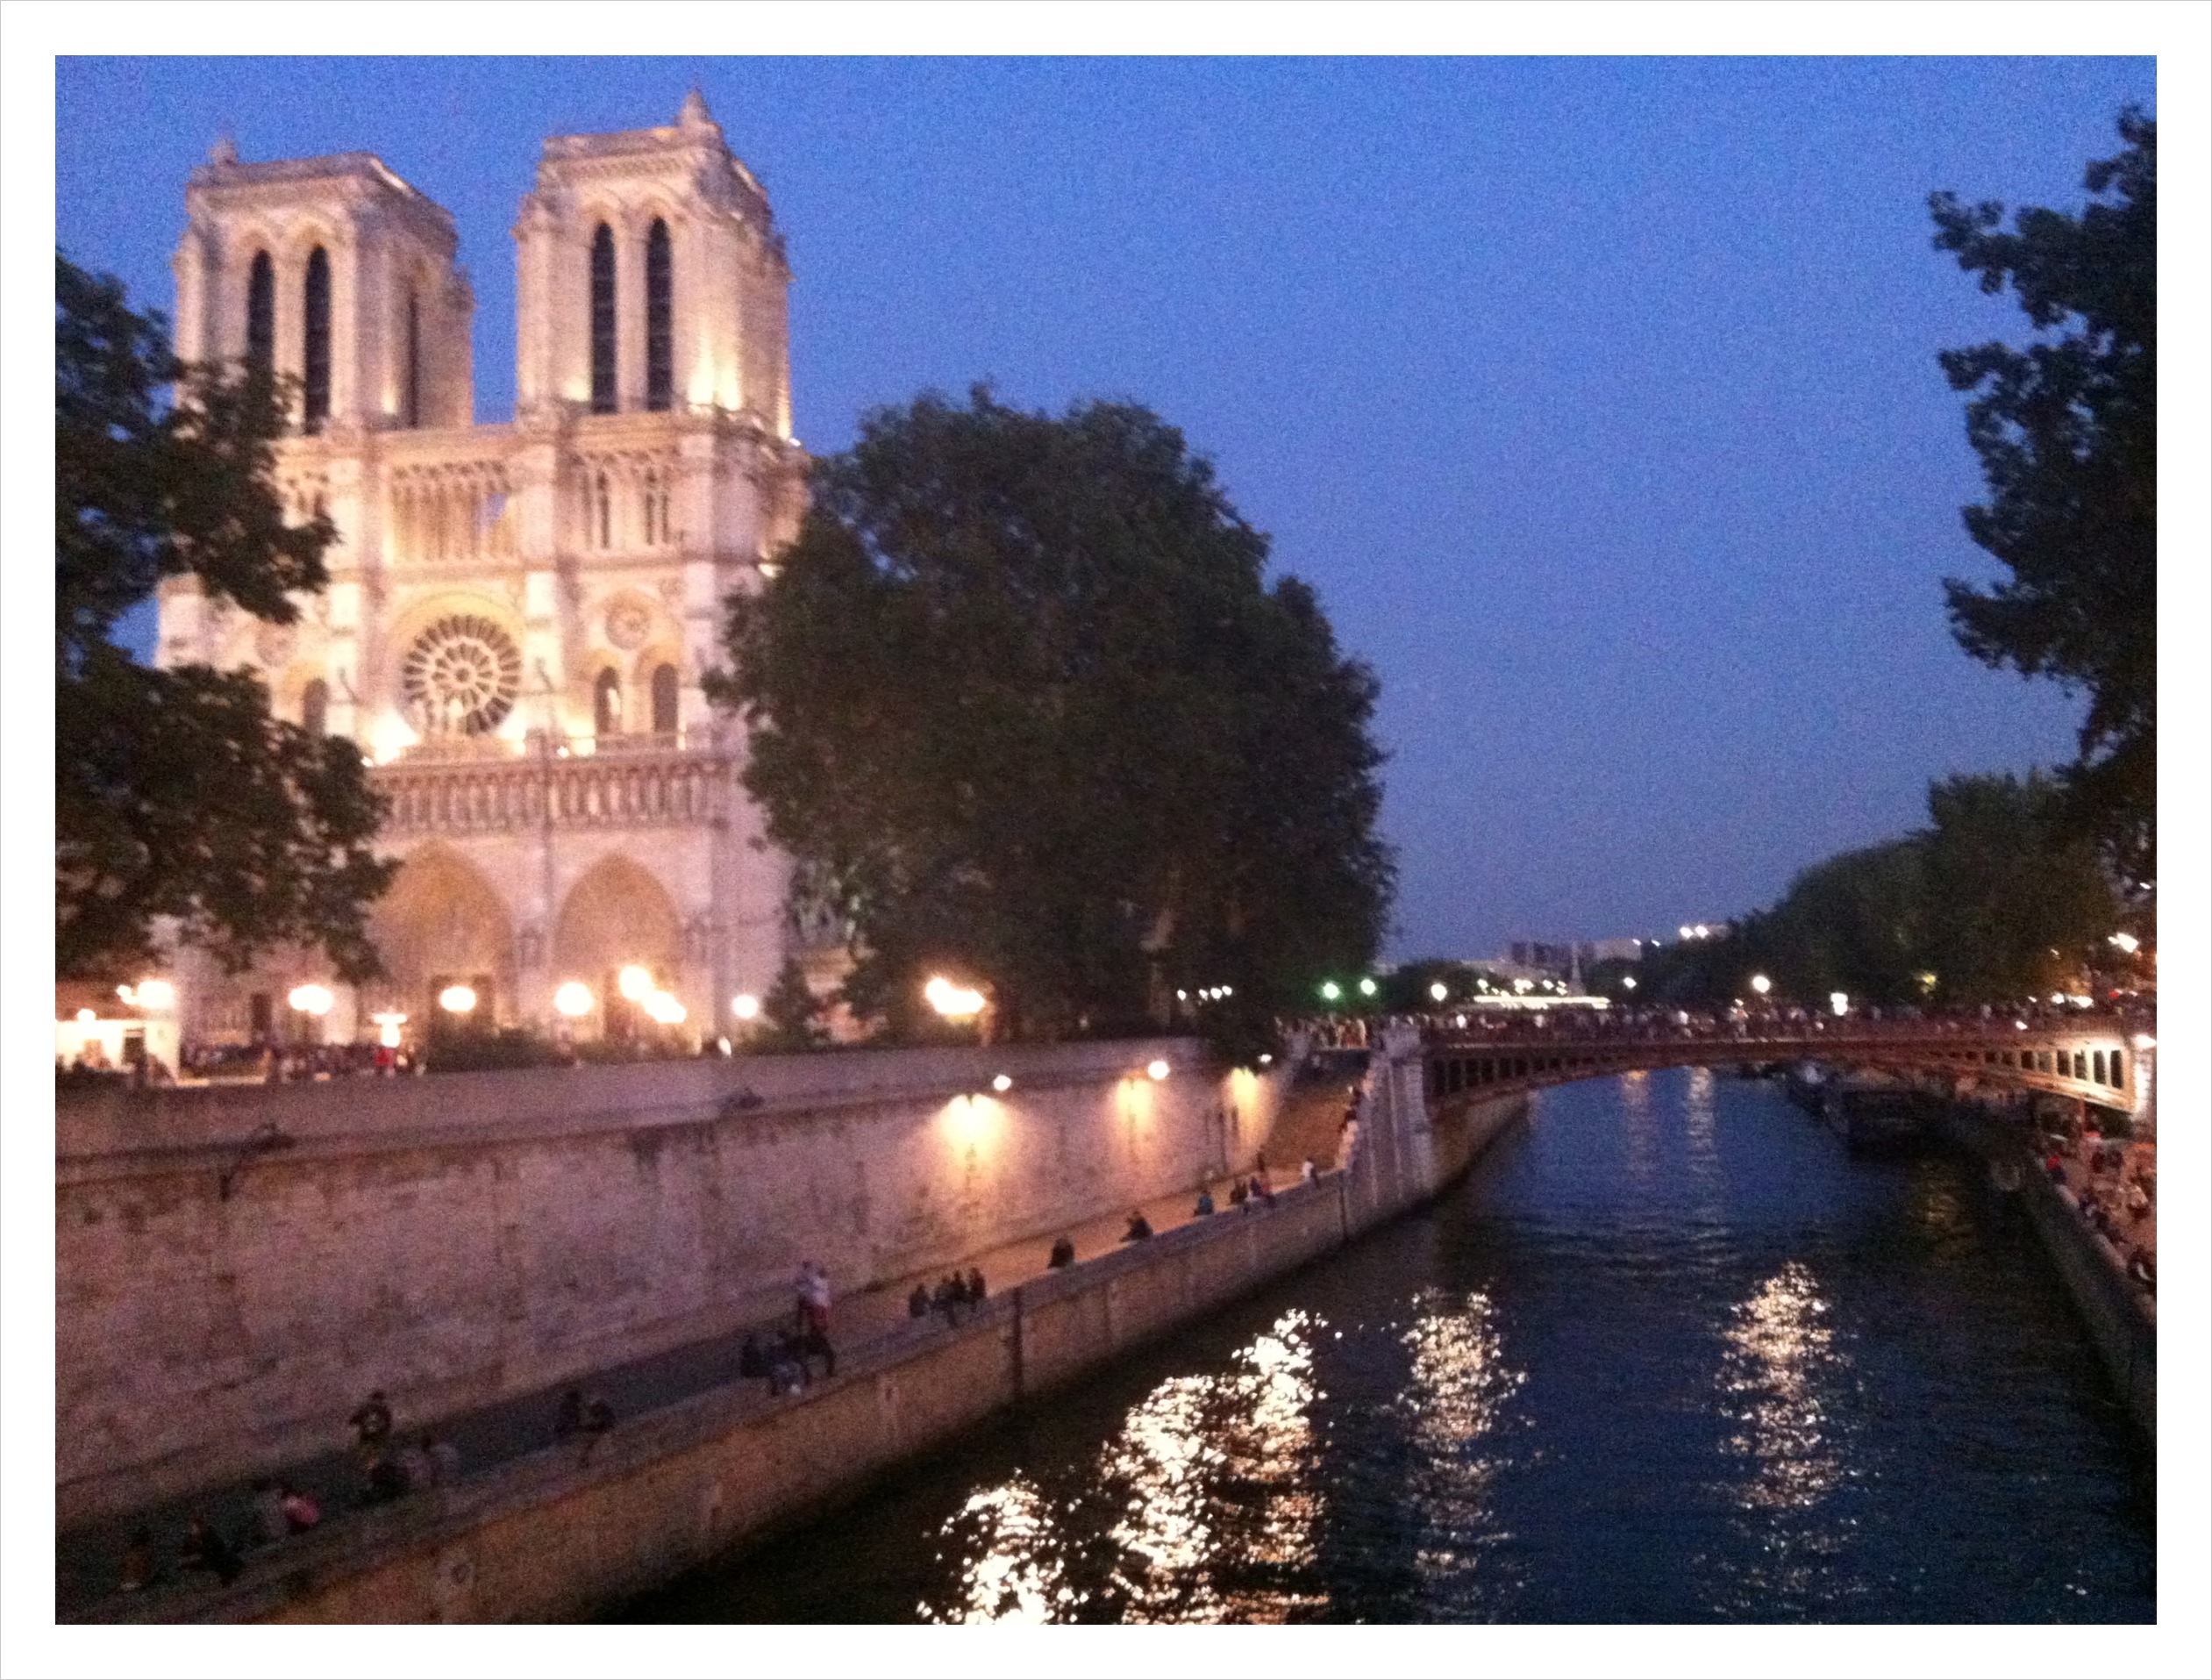 notre-dame-cathedral-in-paris-at-sunset.jpg